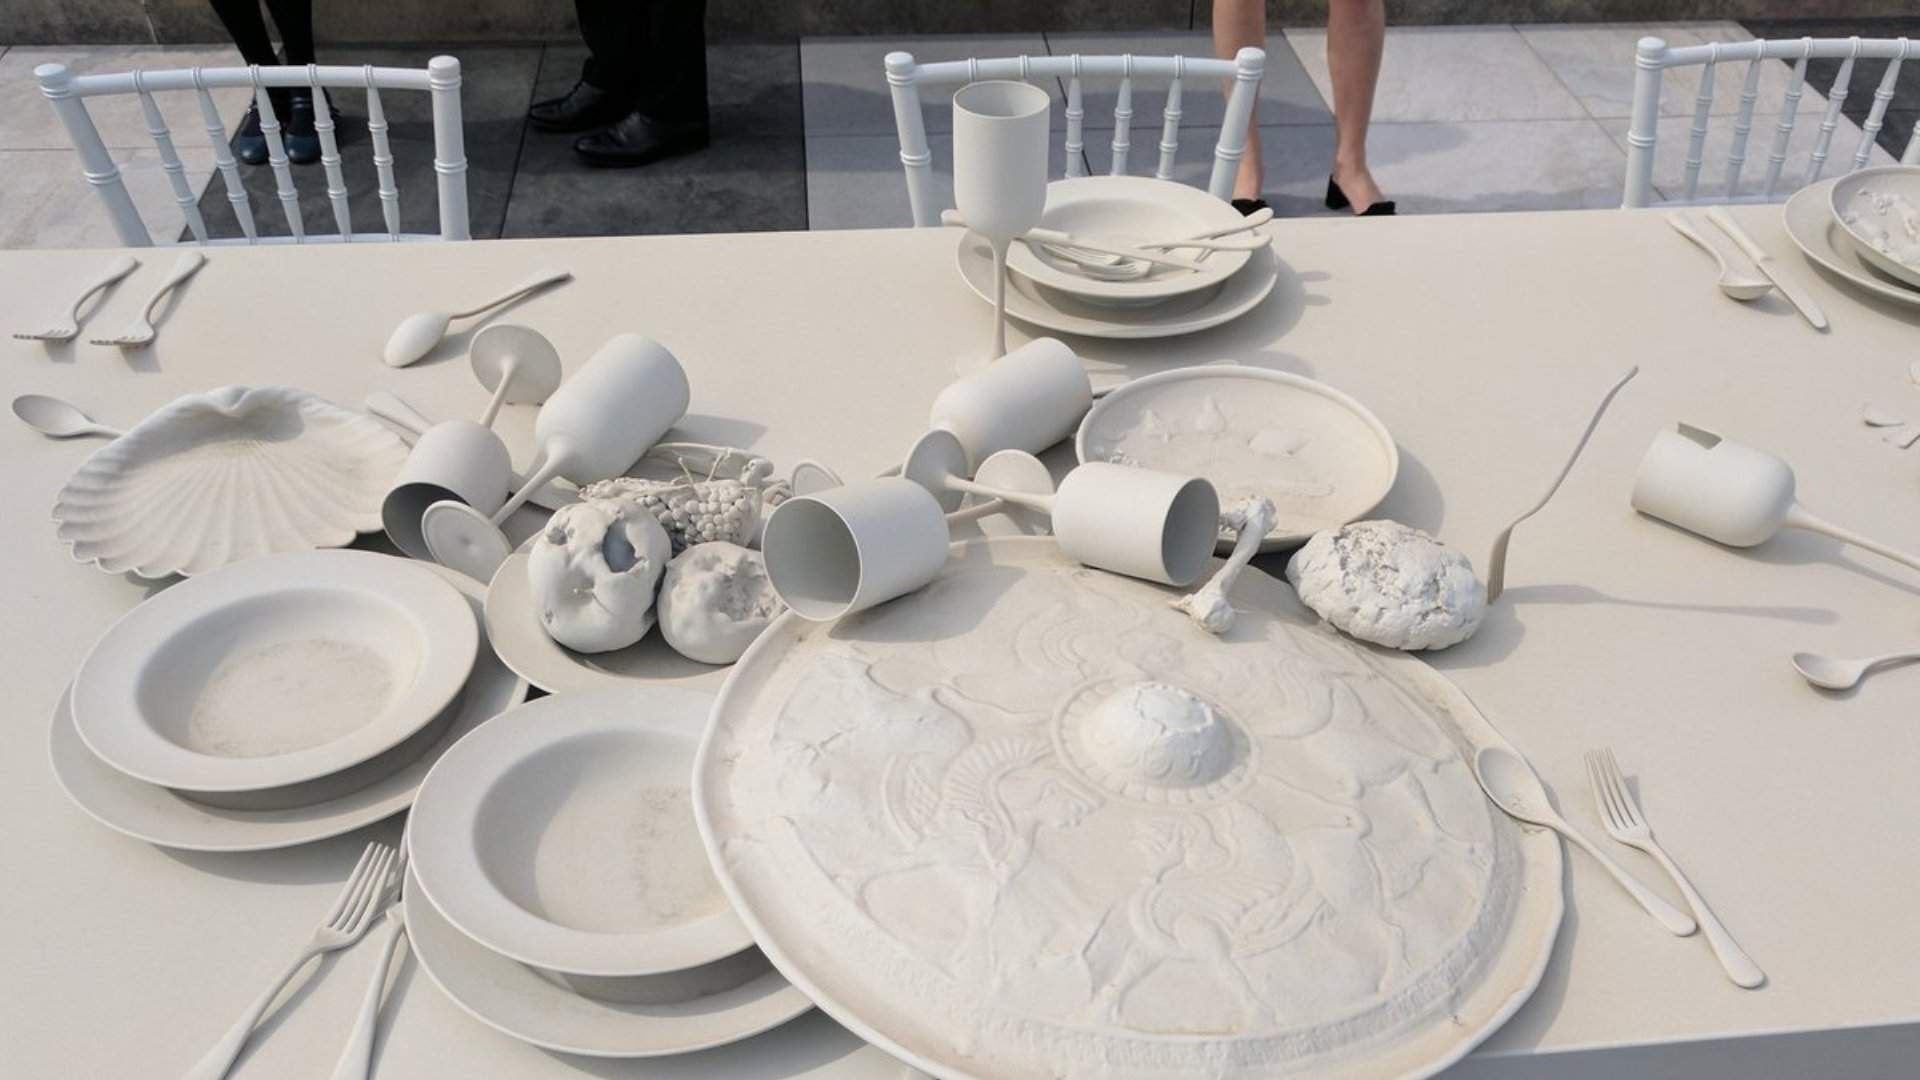 NYC's Metropolitan Museum of Art Has Installed a Surreal Rooftop Dinner Party